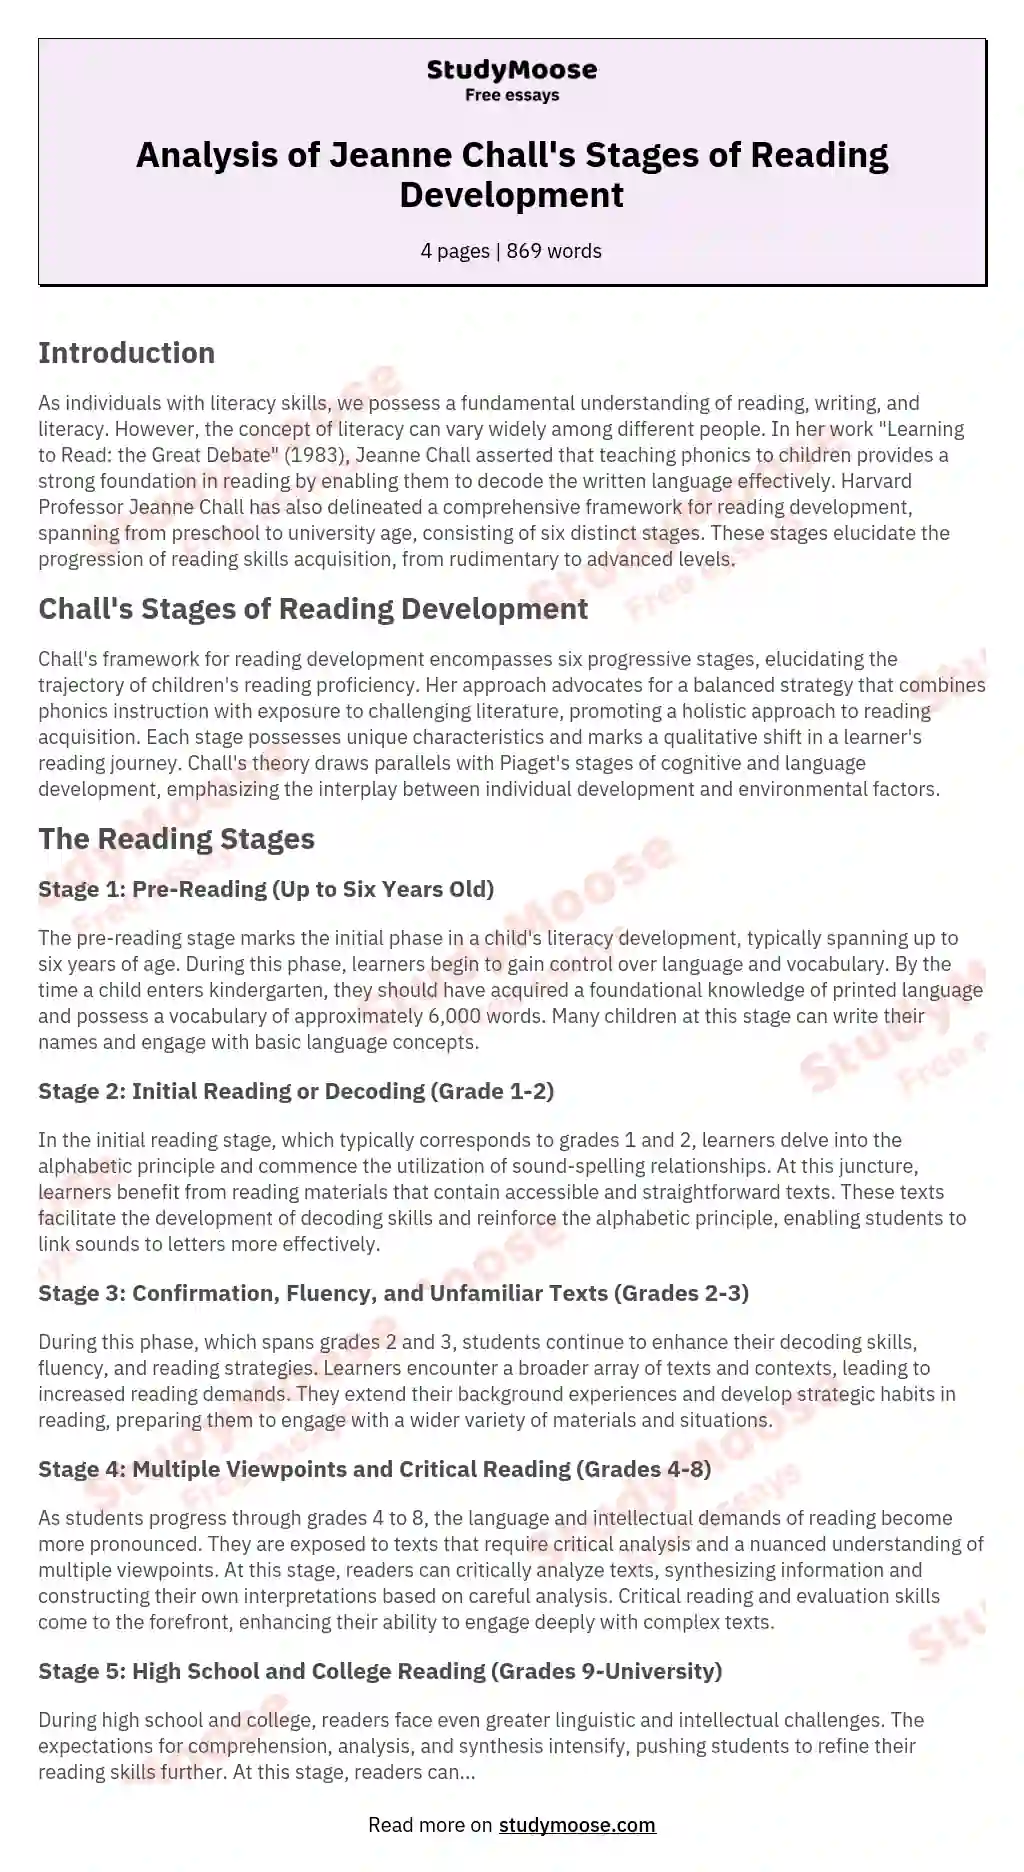 Analysis of Jeanne Chall's Stages of Reading Development essay